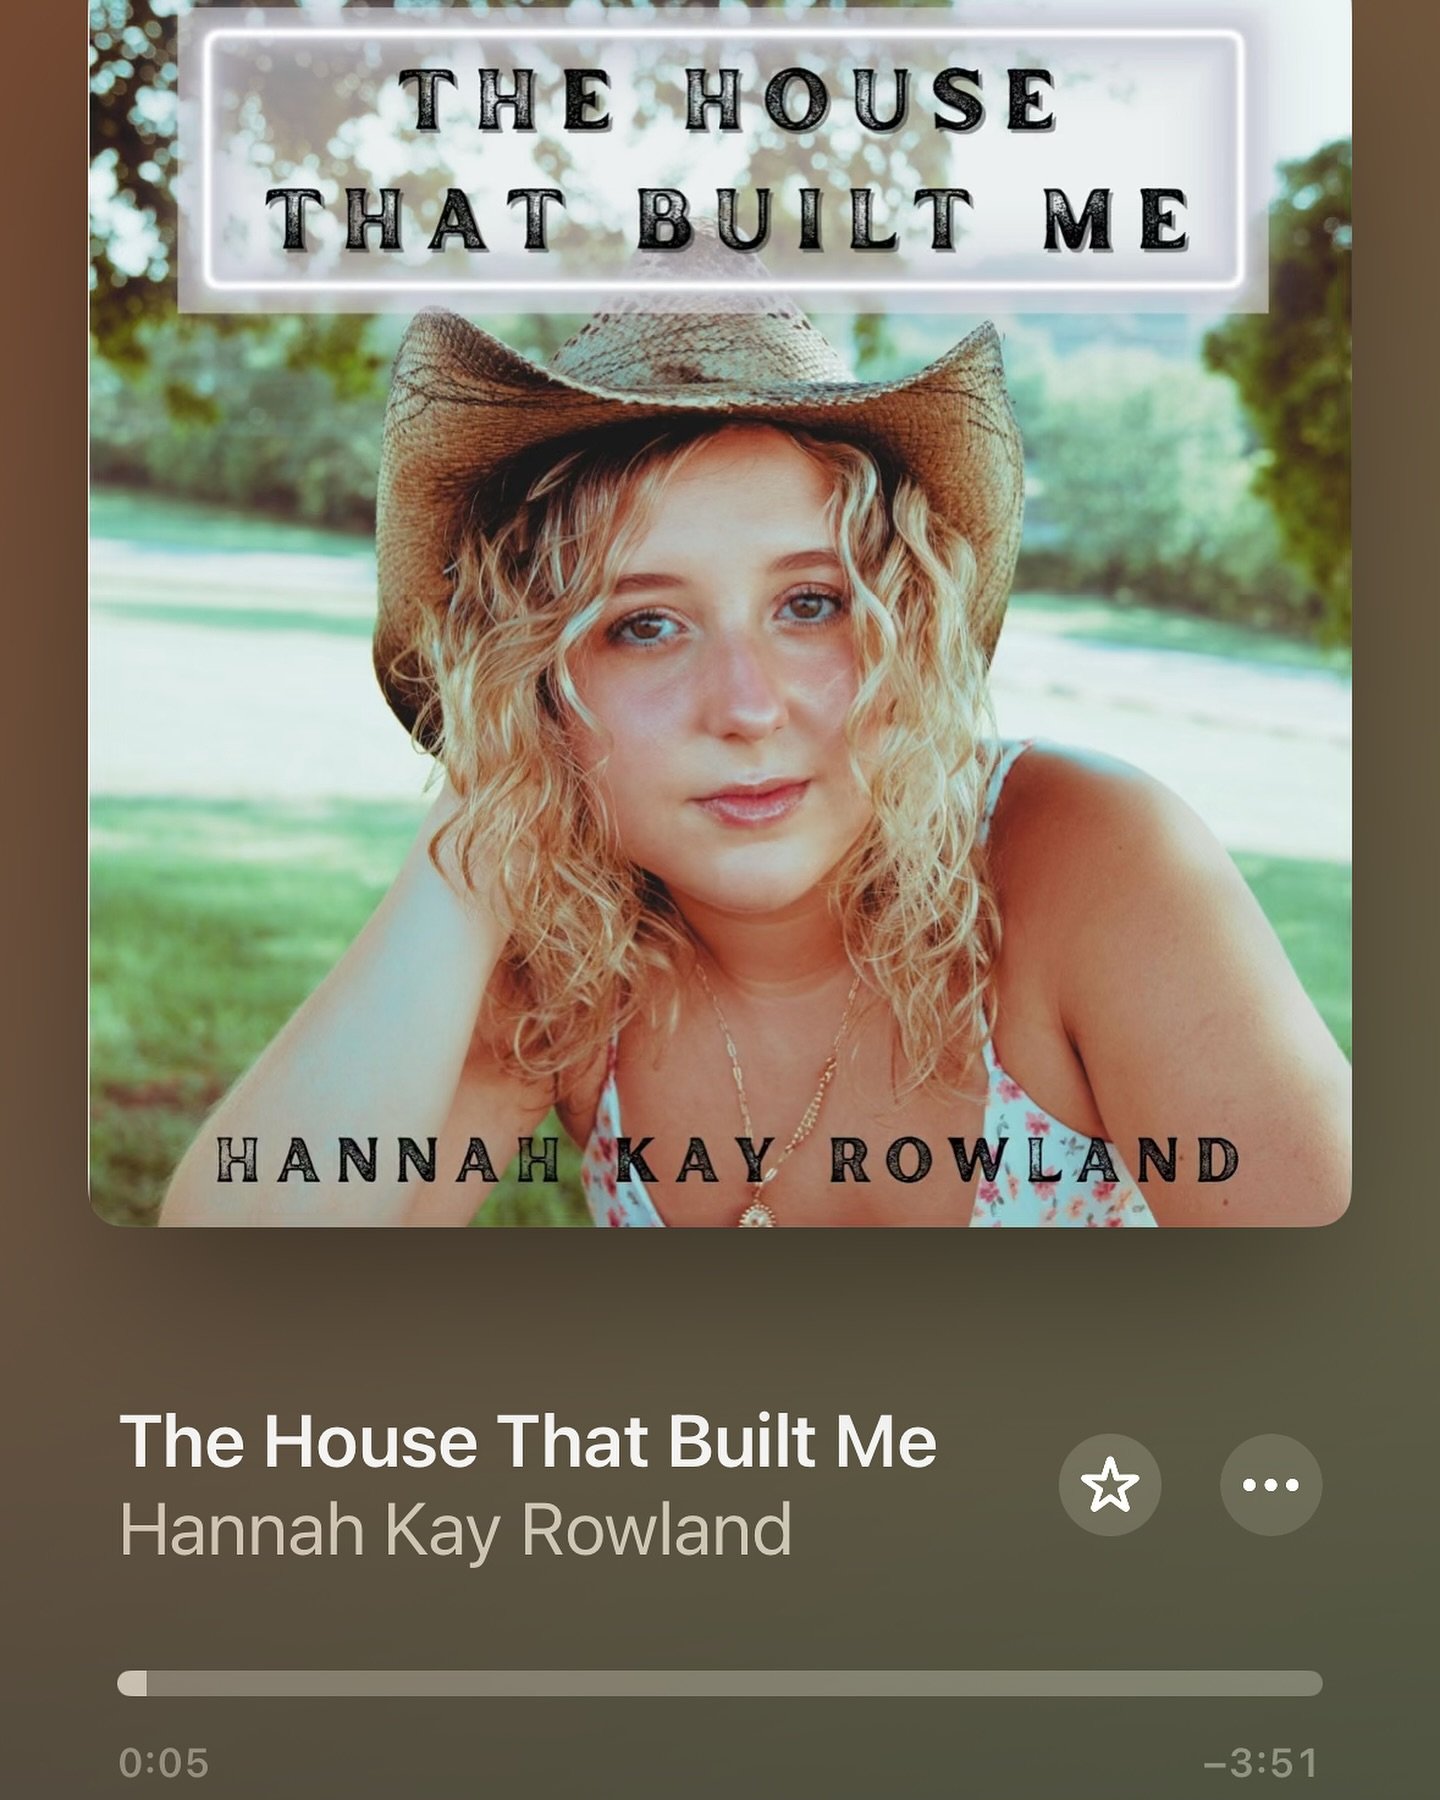 The House that Built Me is OUT NOW!!!! I&rsquo;m so excited about this one! Go take a listen!! Link is in bio, as well as my linktree🤍🤍 #HKR #recordingartist #housethatbuiltme #mirandalambert